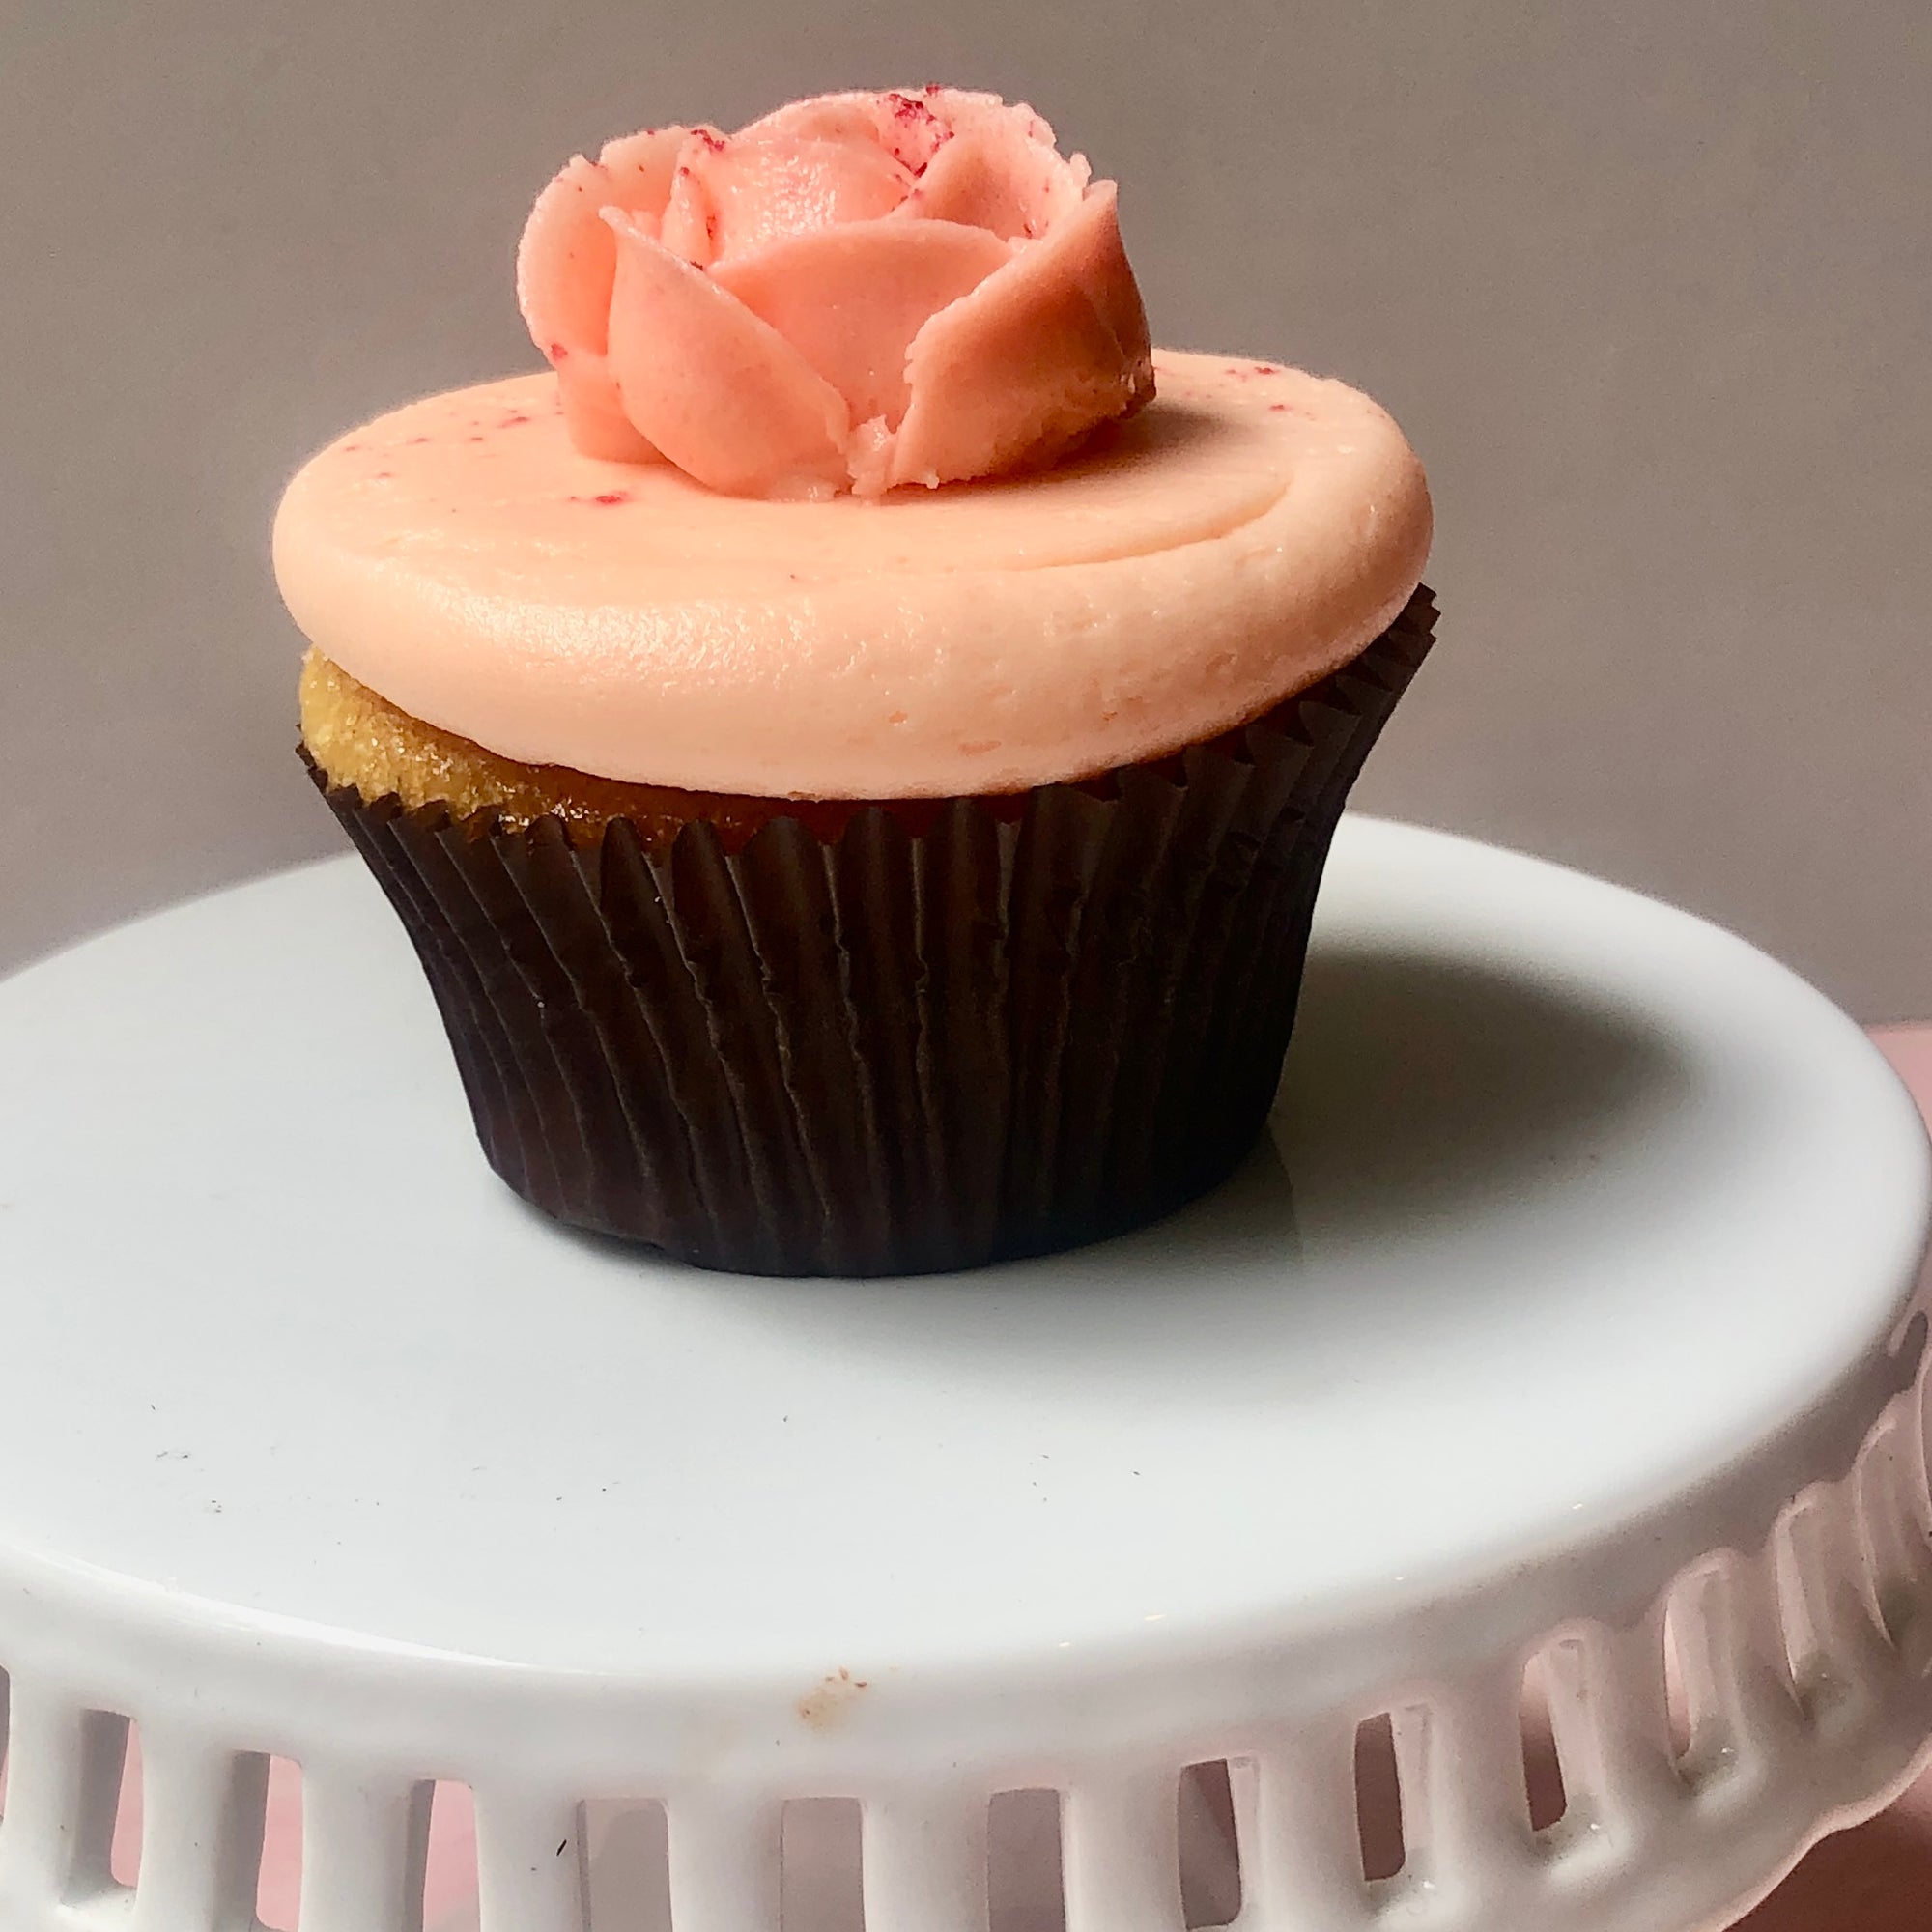 Make Mother's Day Extra Sweet with Dello Mano's Stunning Rose Cupcakes